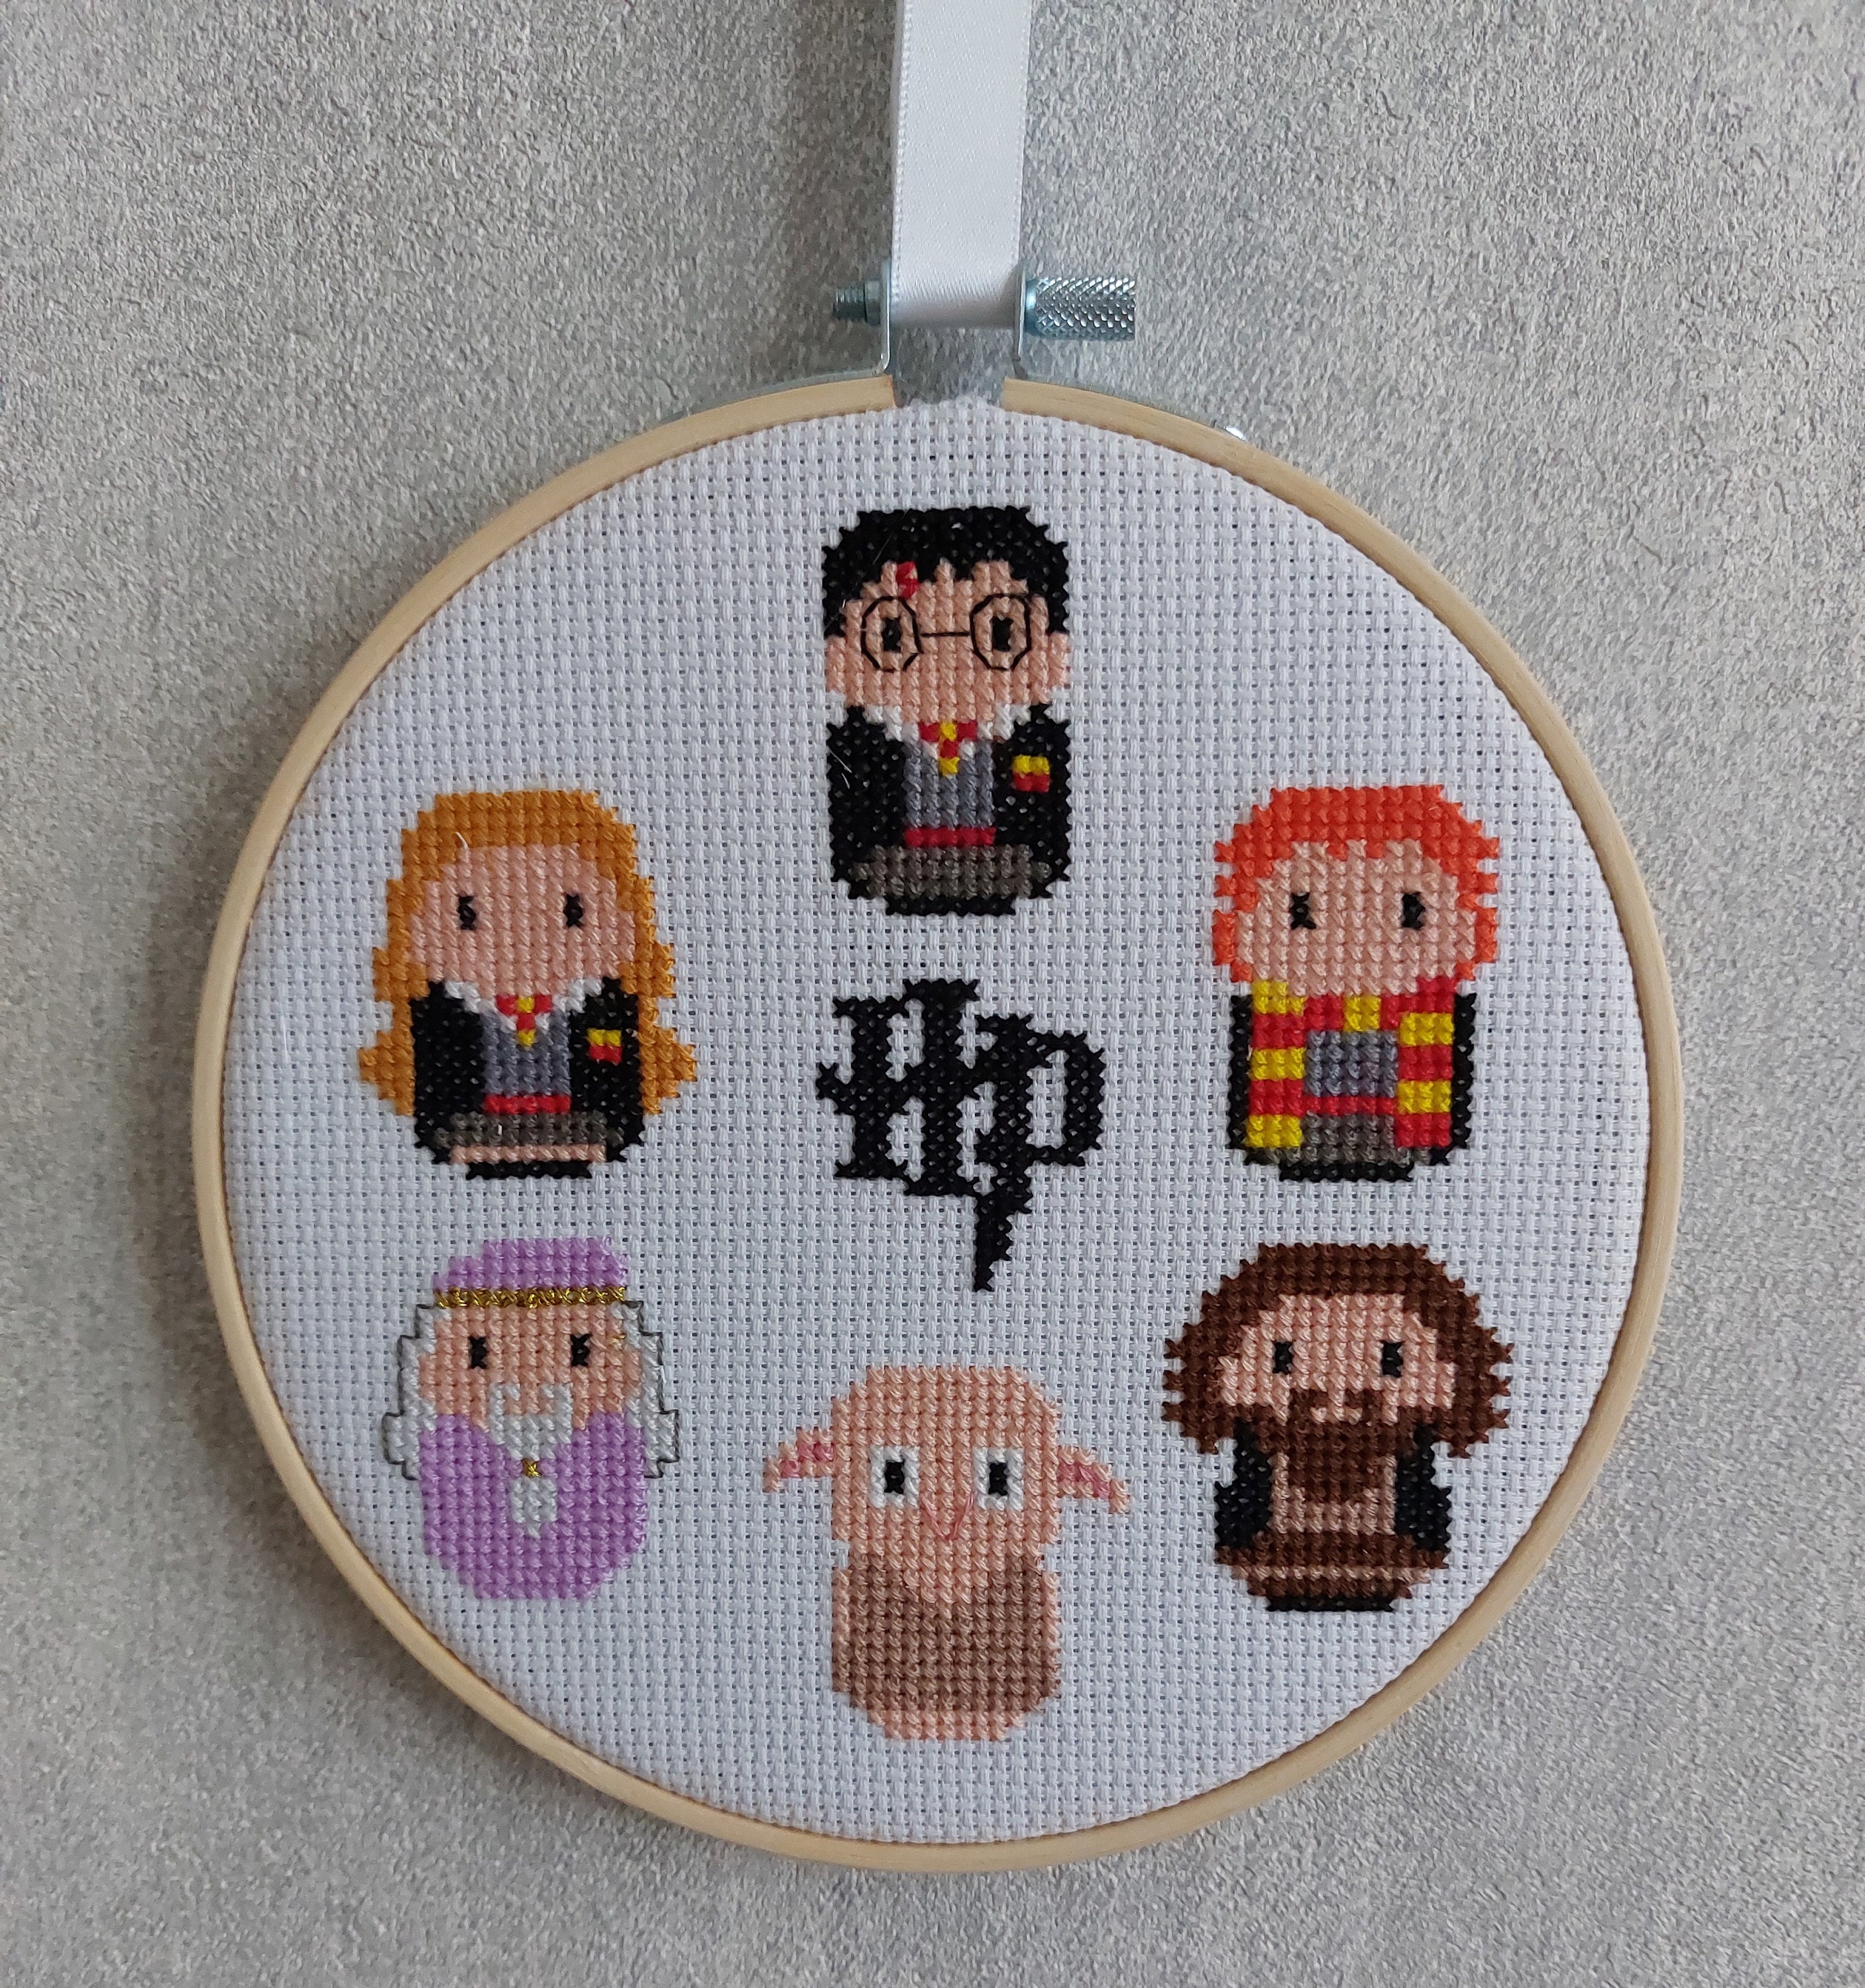 Completed Finished Harry Potter Cross Stitch in Hoop 